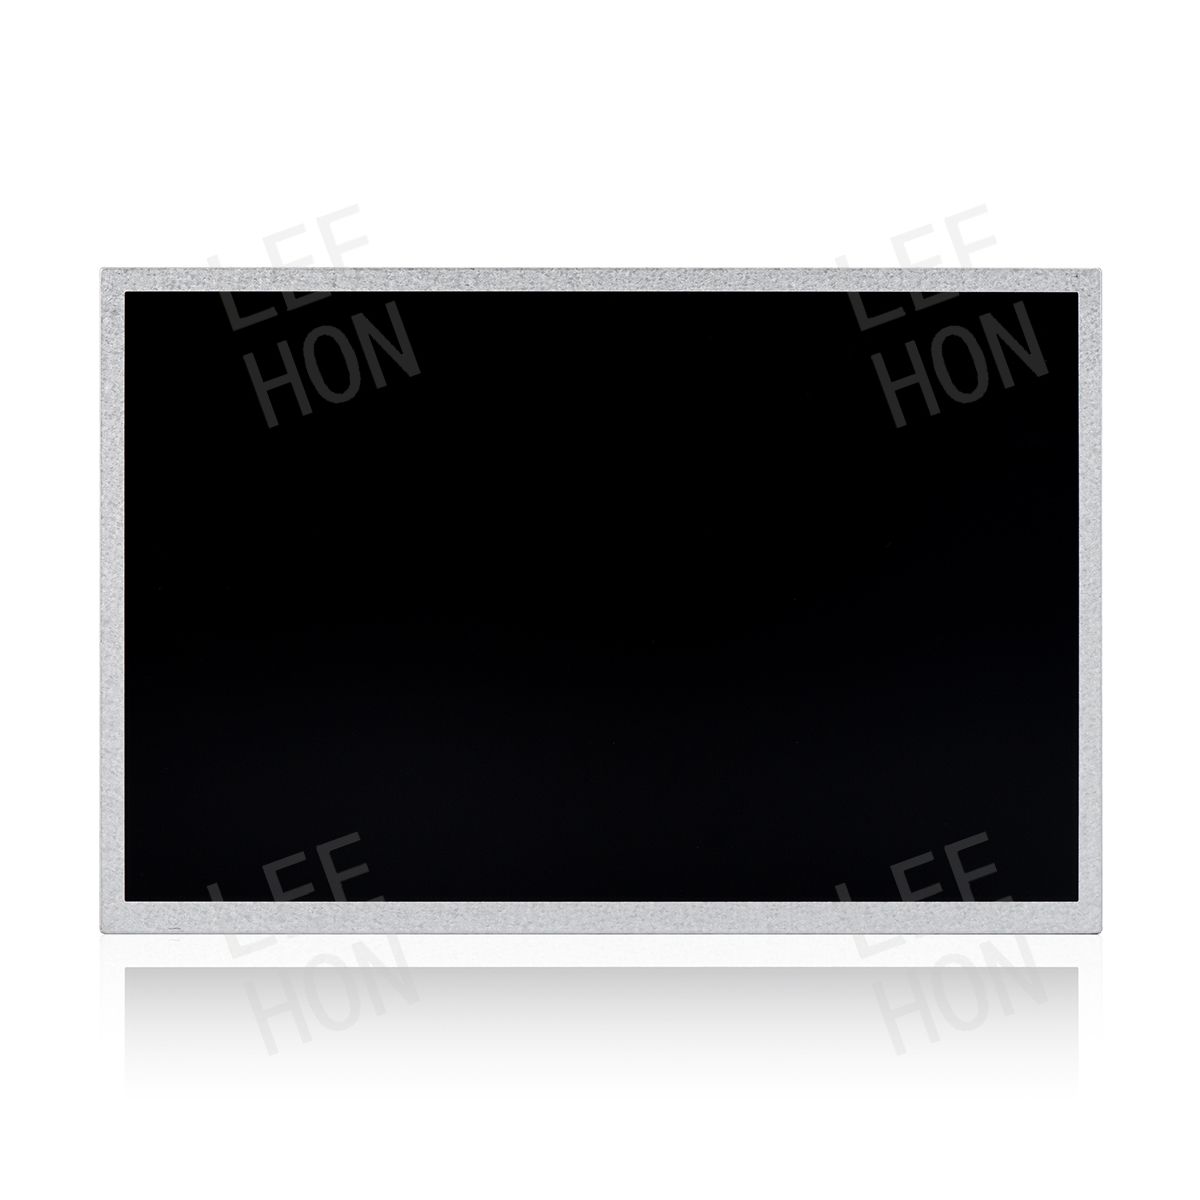 AUO 12.1 Inch 1280x800 WXGA LCD Panel TFT IPS Display G121EAN01.4 300nits and 30 pins LVDS